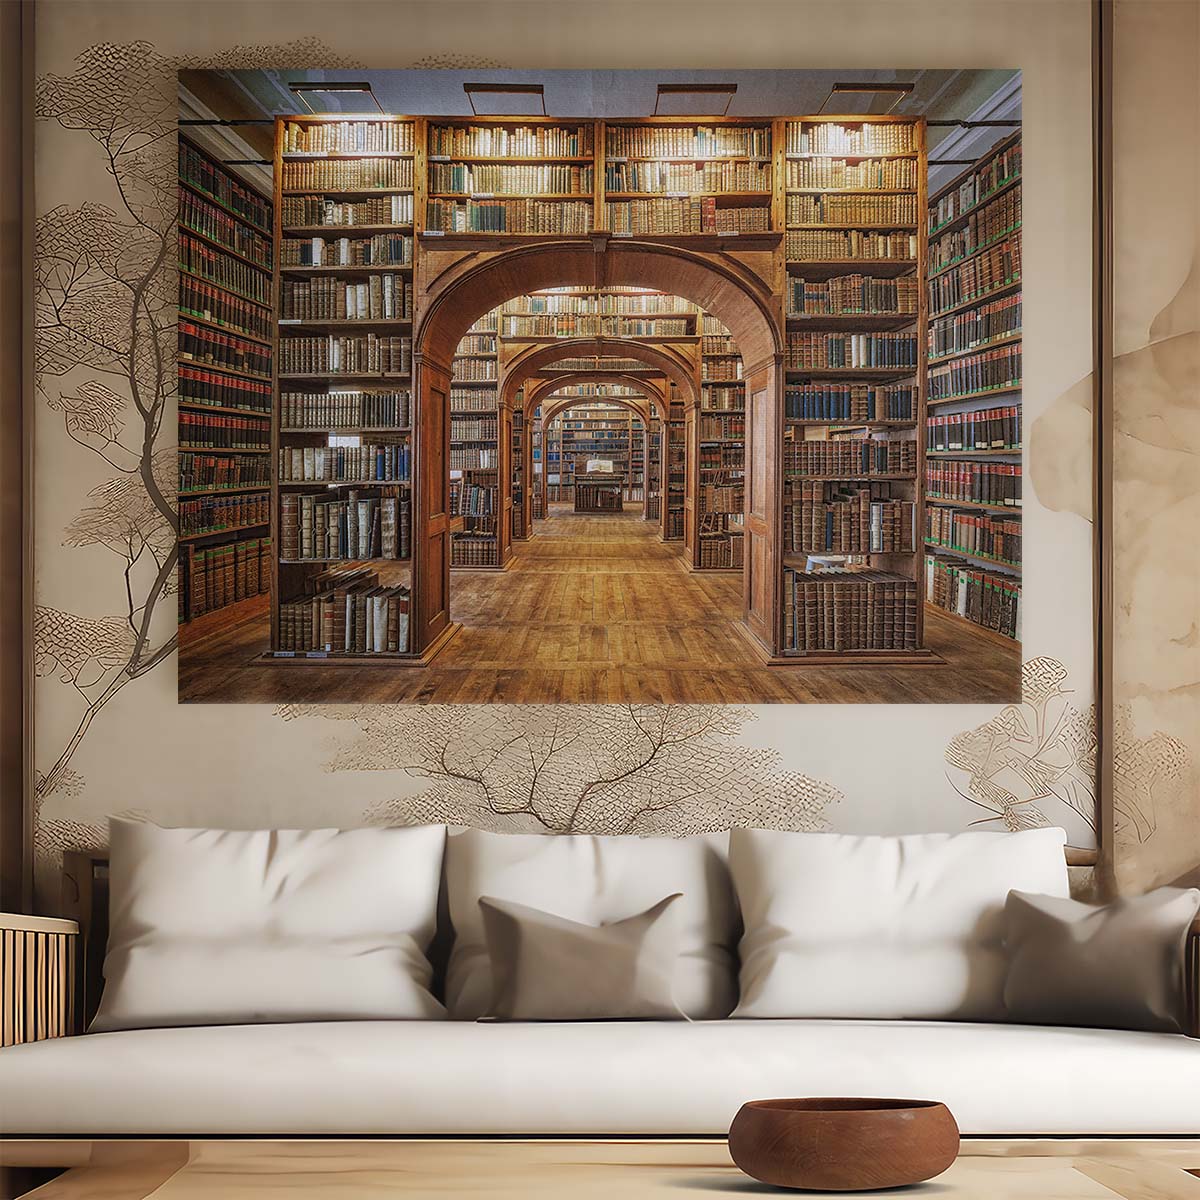 Upper Lausitzian Library Interior, Gorlitz Germany - Architectural Photography Wall Art